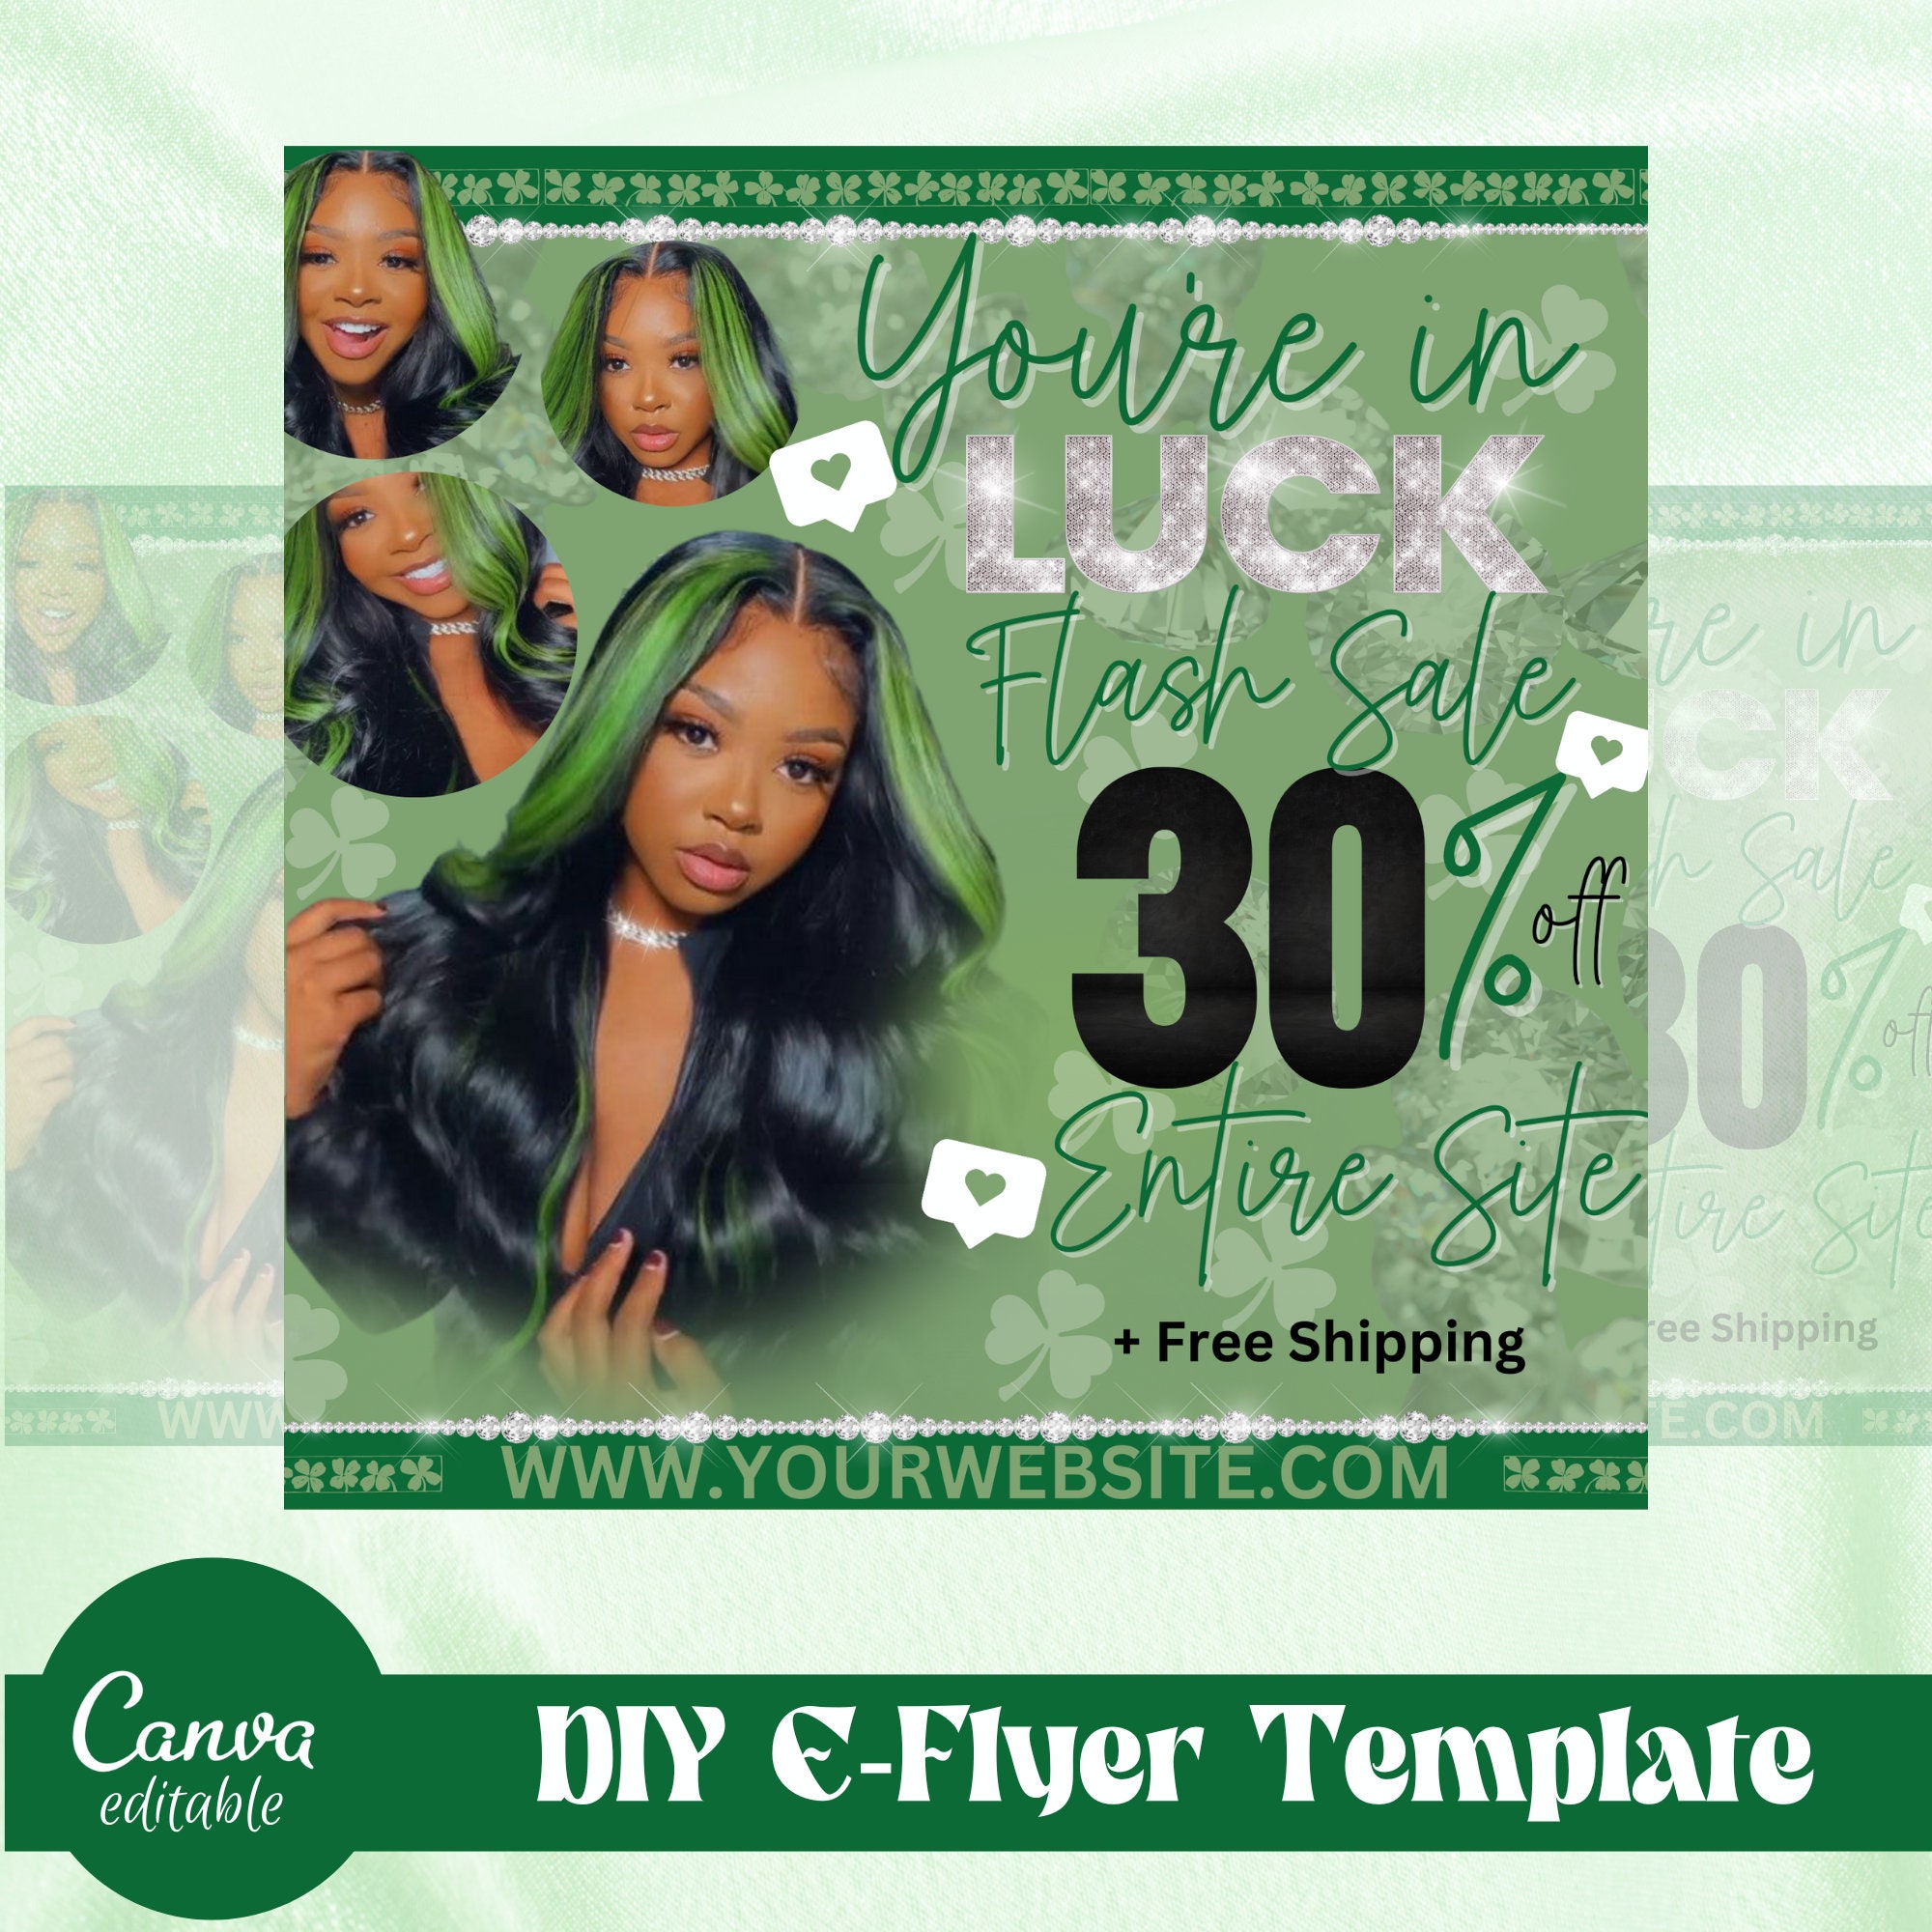 FREE St. Patrick's Day Flyer PDF - Template Download